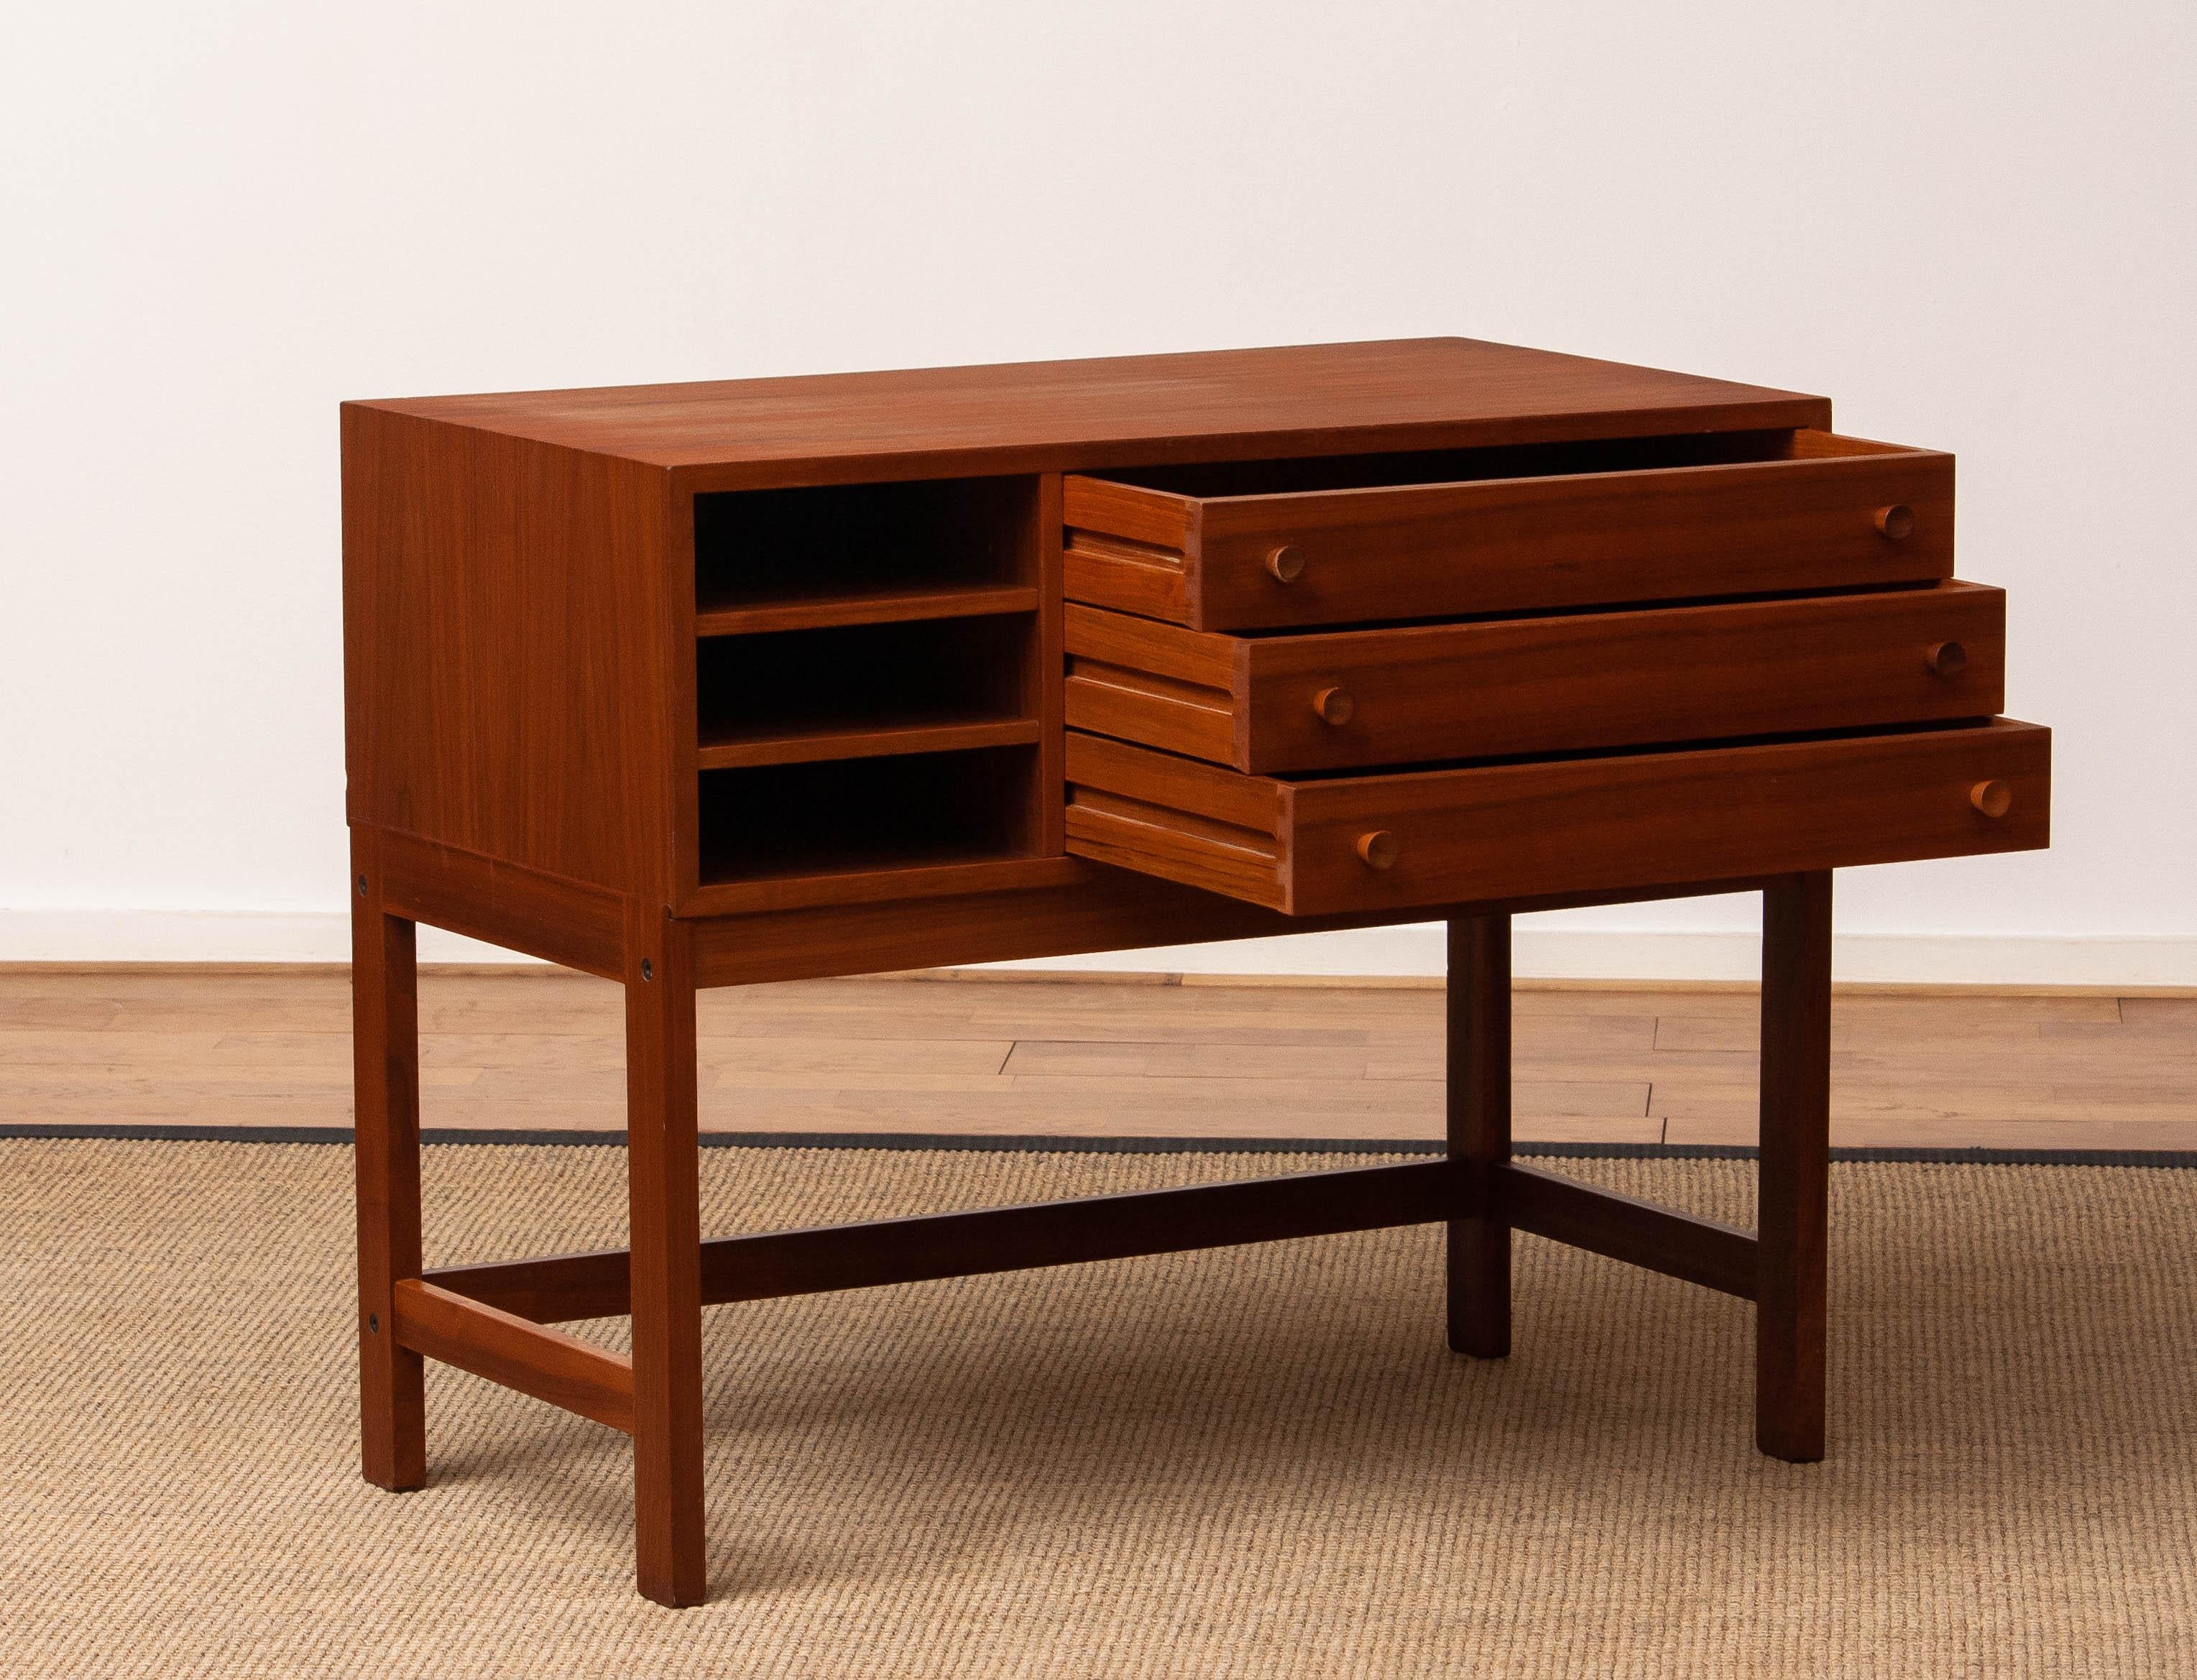 Beech 1960's Teak 'Free Standing' Small Sideboard / Small Credensaz from Denmark For Sale